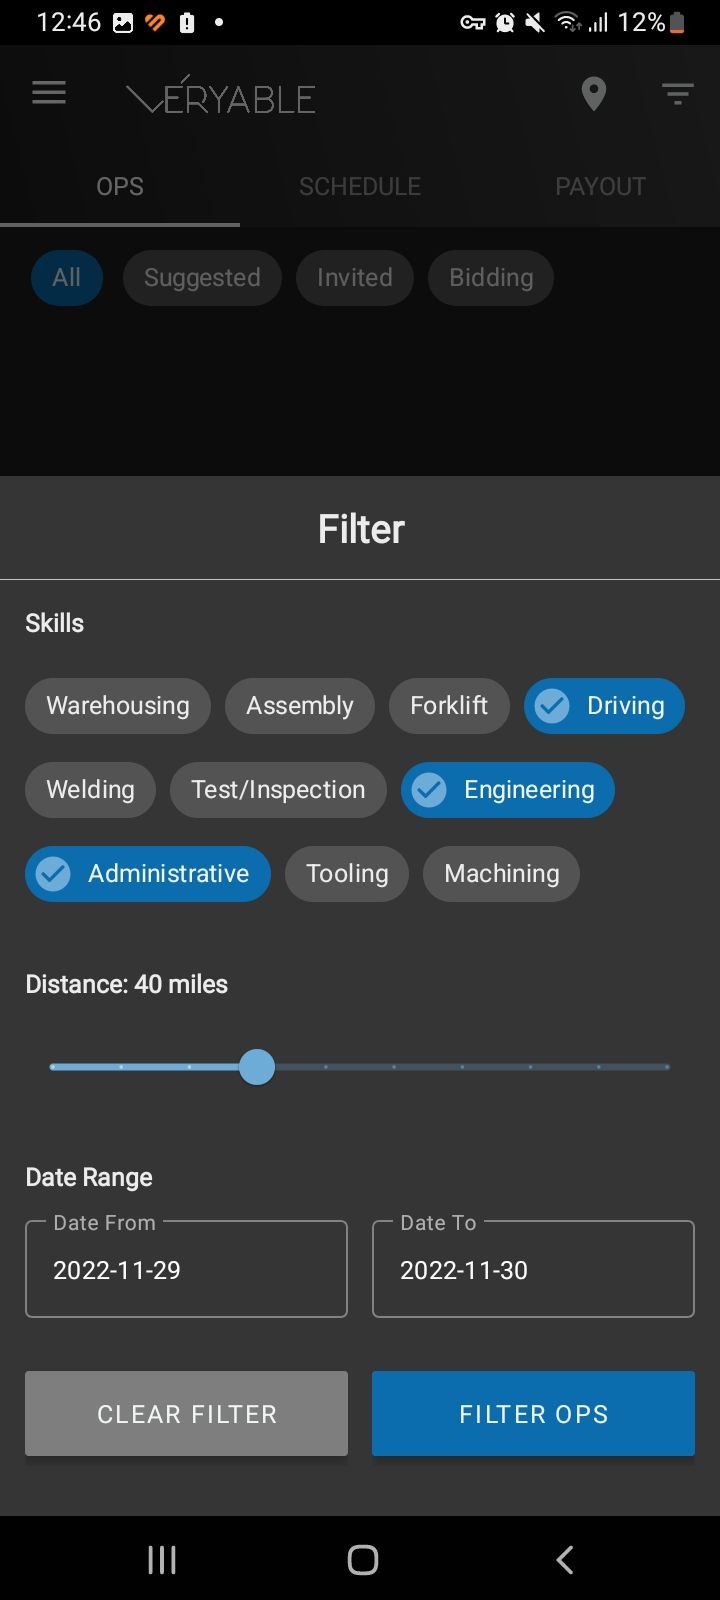 Veryable app filters for job opportunities